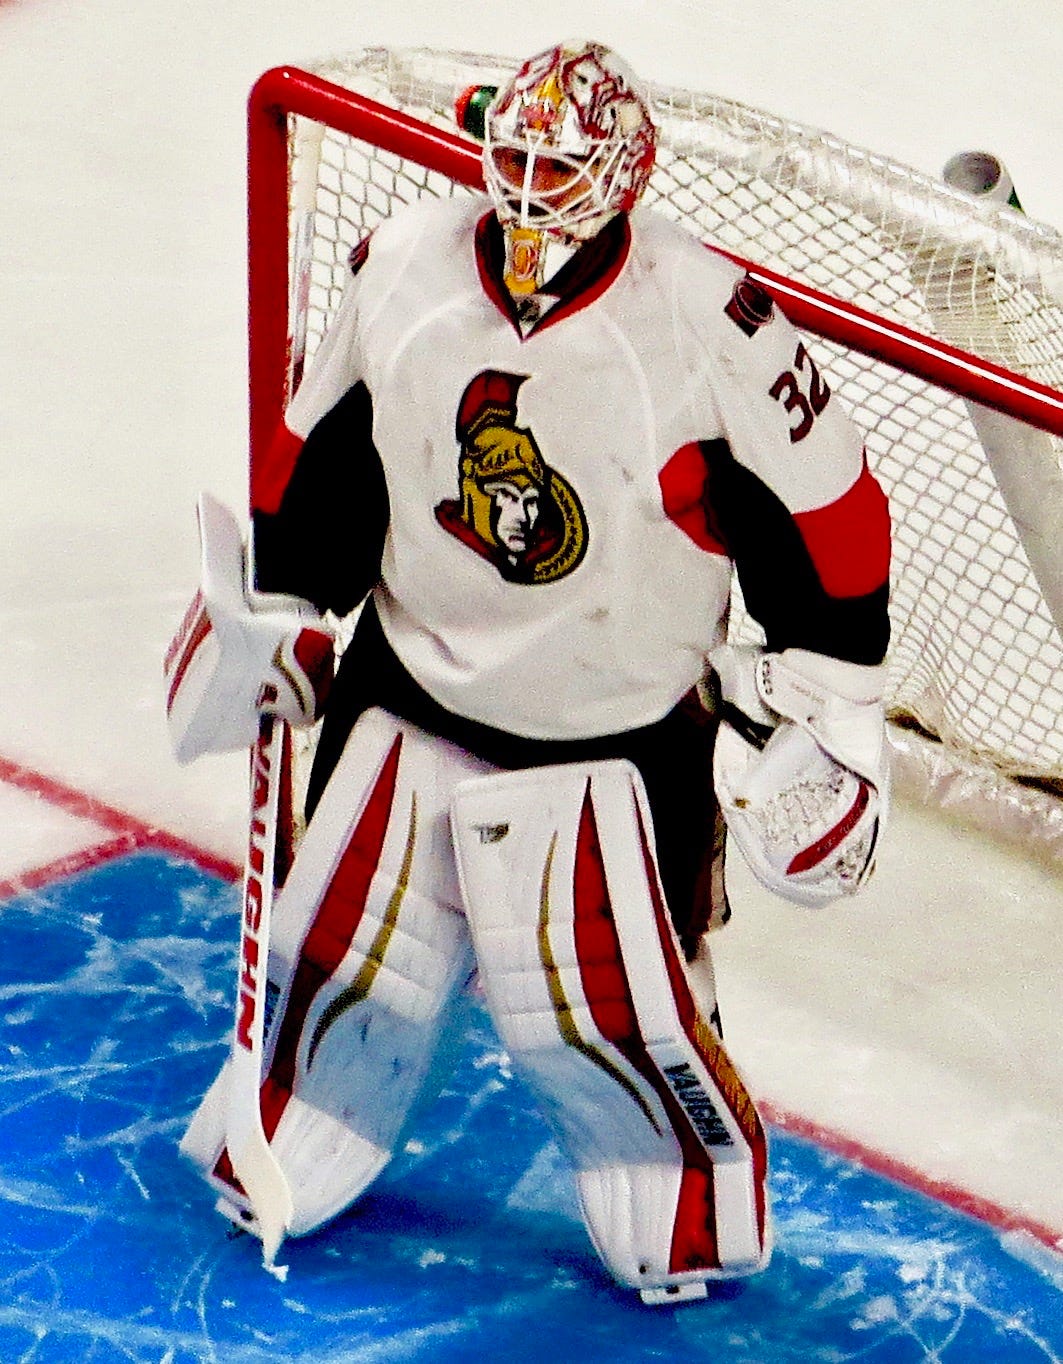 File:Chris Driedger, Montreal Canadiens 3, Ottawa Senators 4, Centre Bell,  Montreal, Quebec (29439729474) (cropped).jpg - Wikimedia Commons